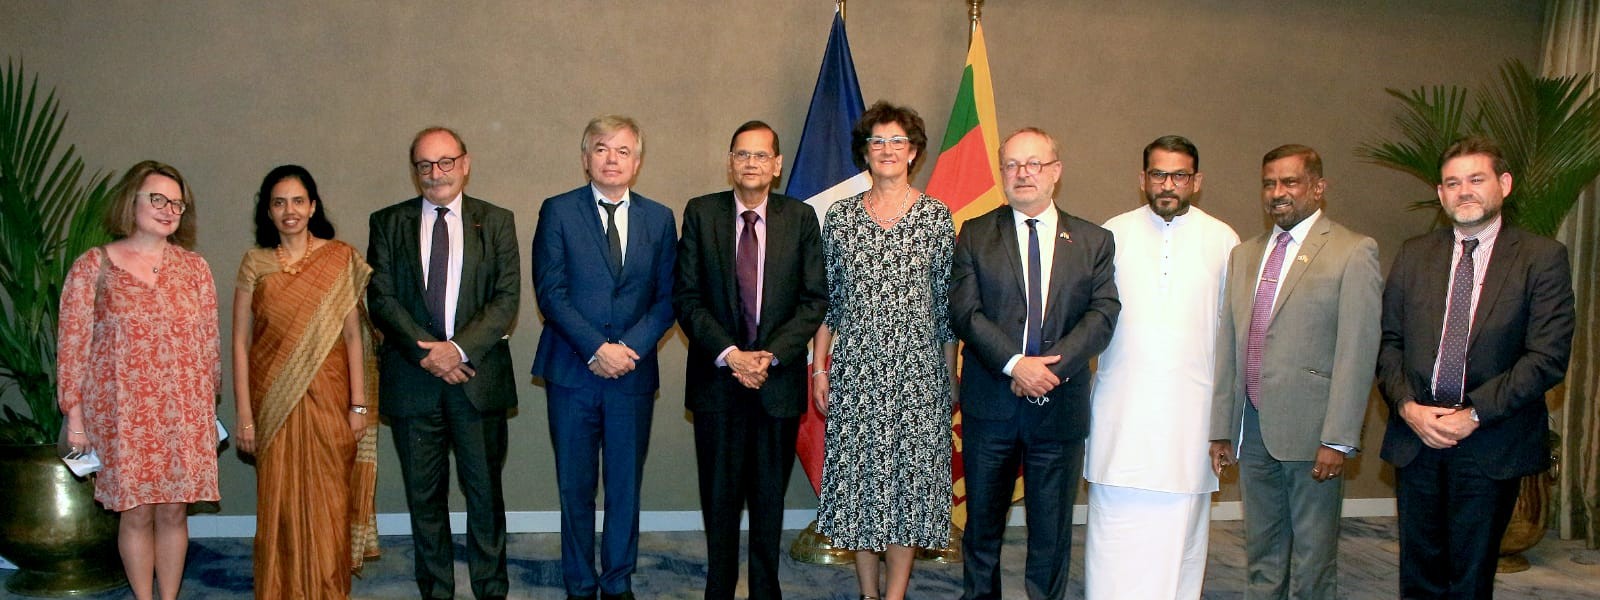 French markets to be expanded for value added products from Sri Lanka